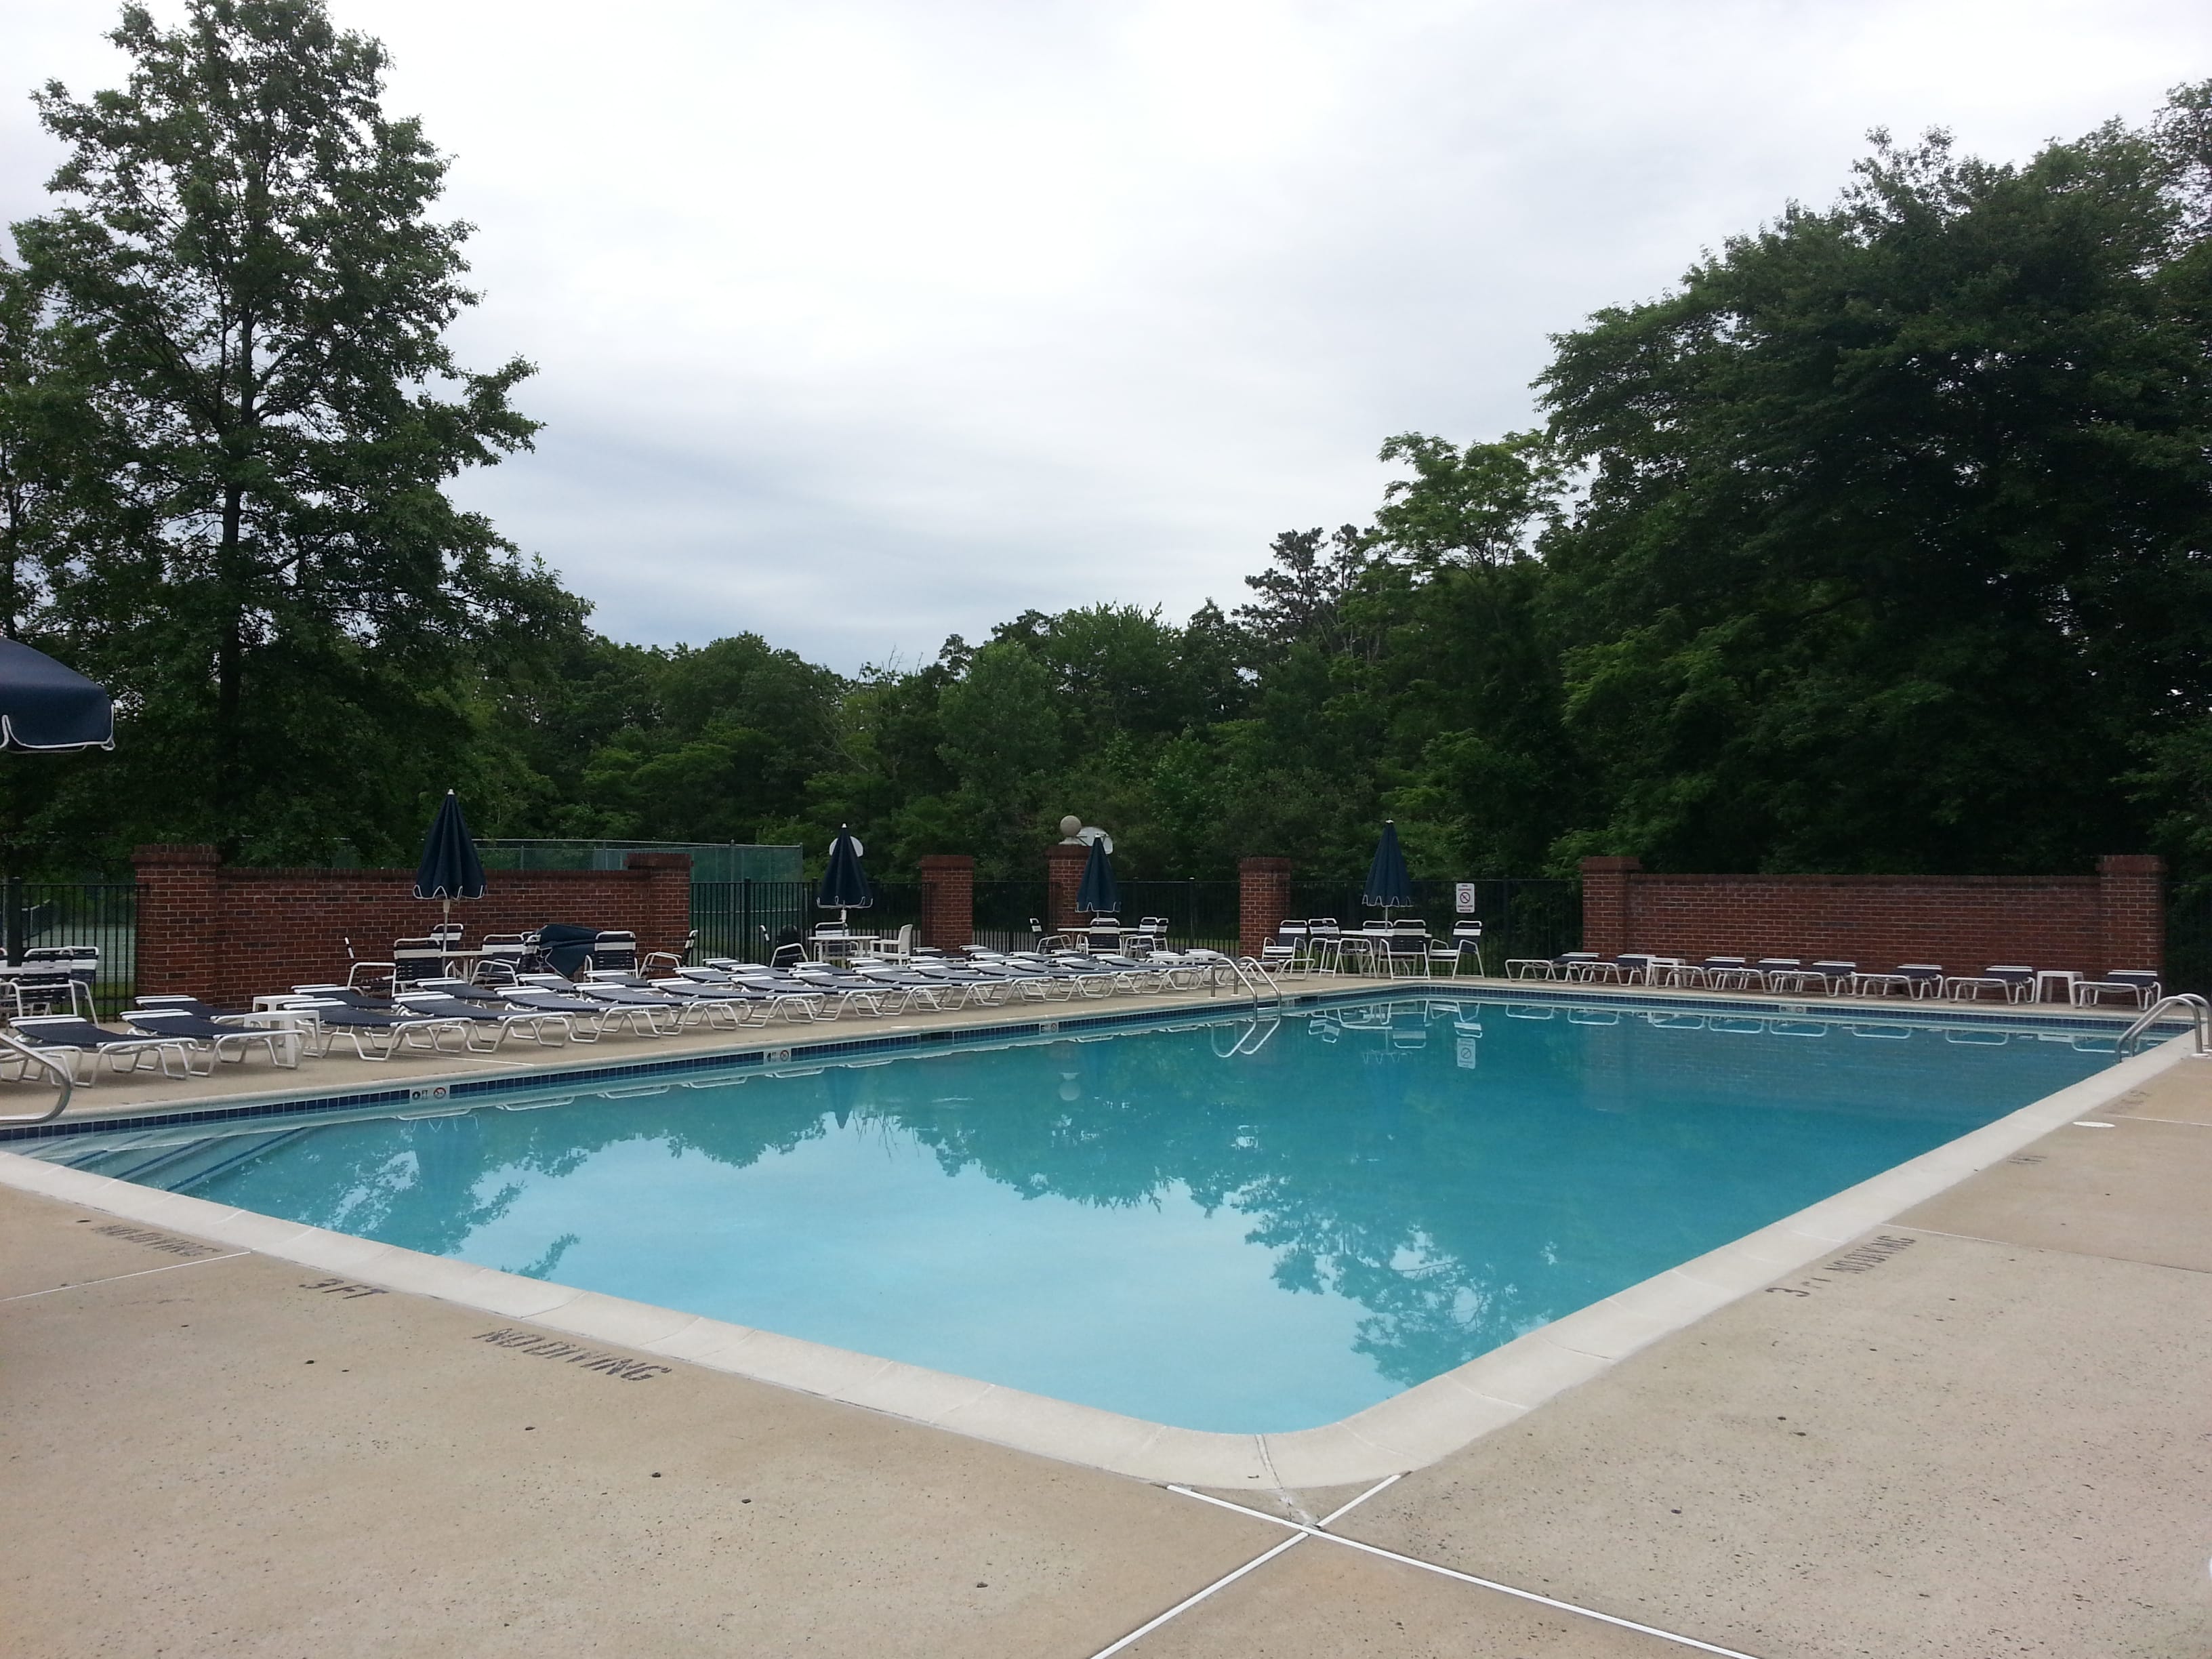 Hidden Meadows has a large pool and plenty of lounge chairs for everyone.